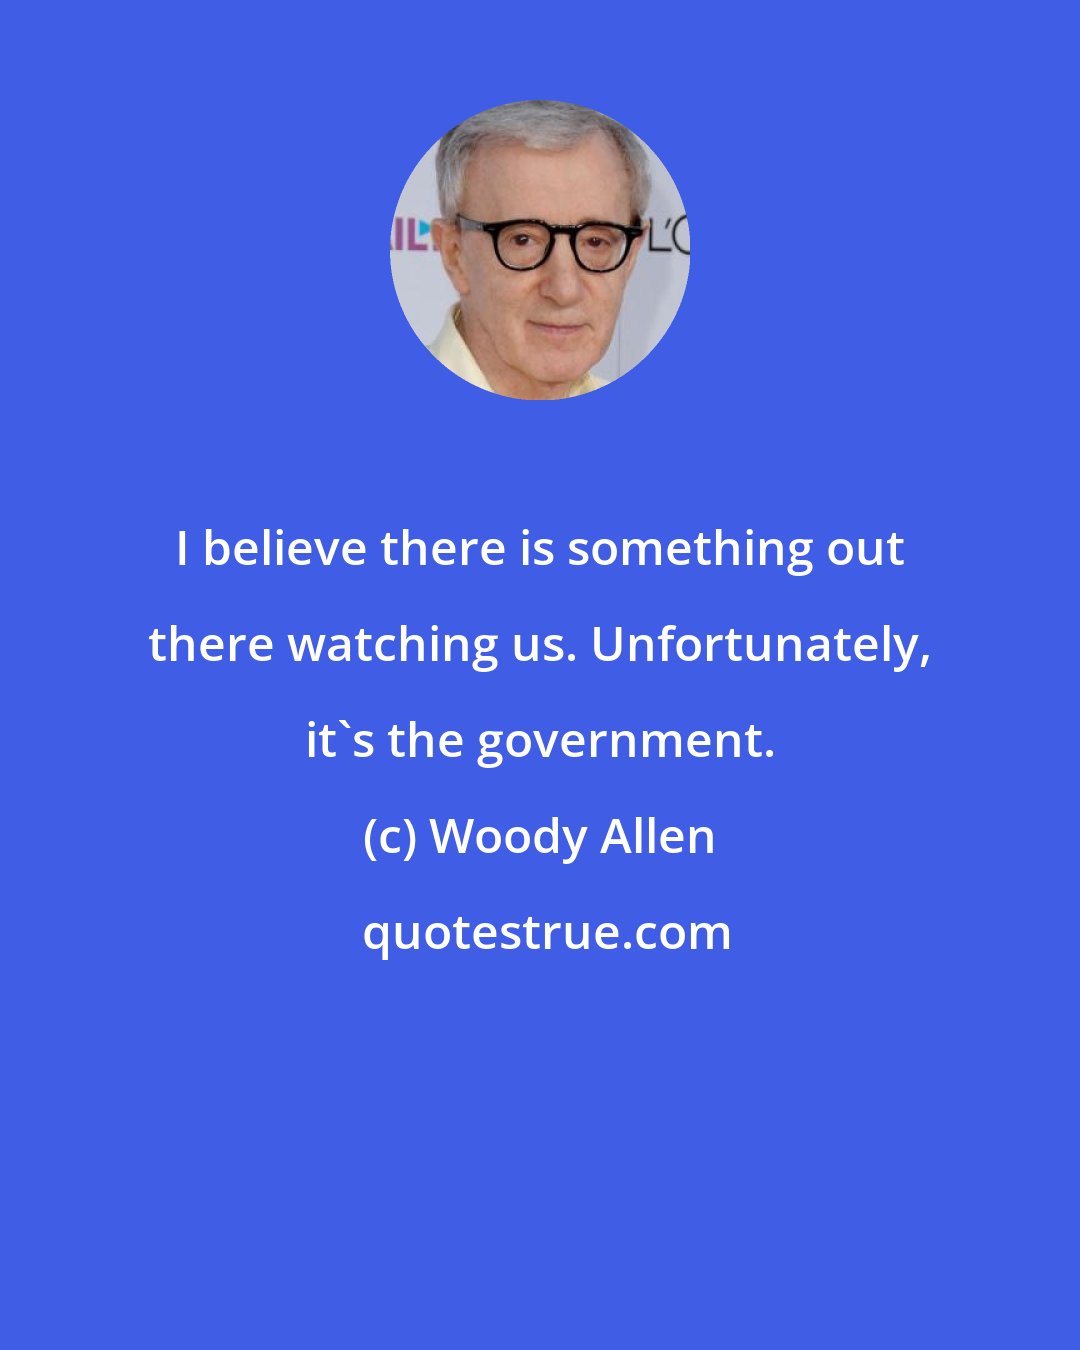 Woody Allen: I believe there is something out there watching us. Unfortunately, it's the government.